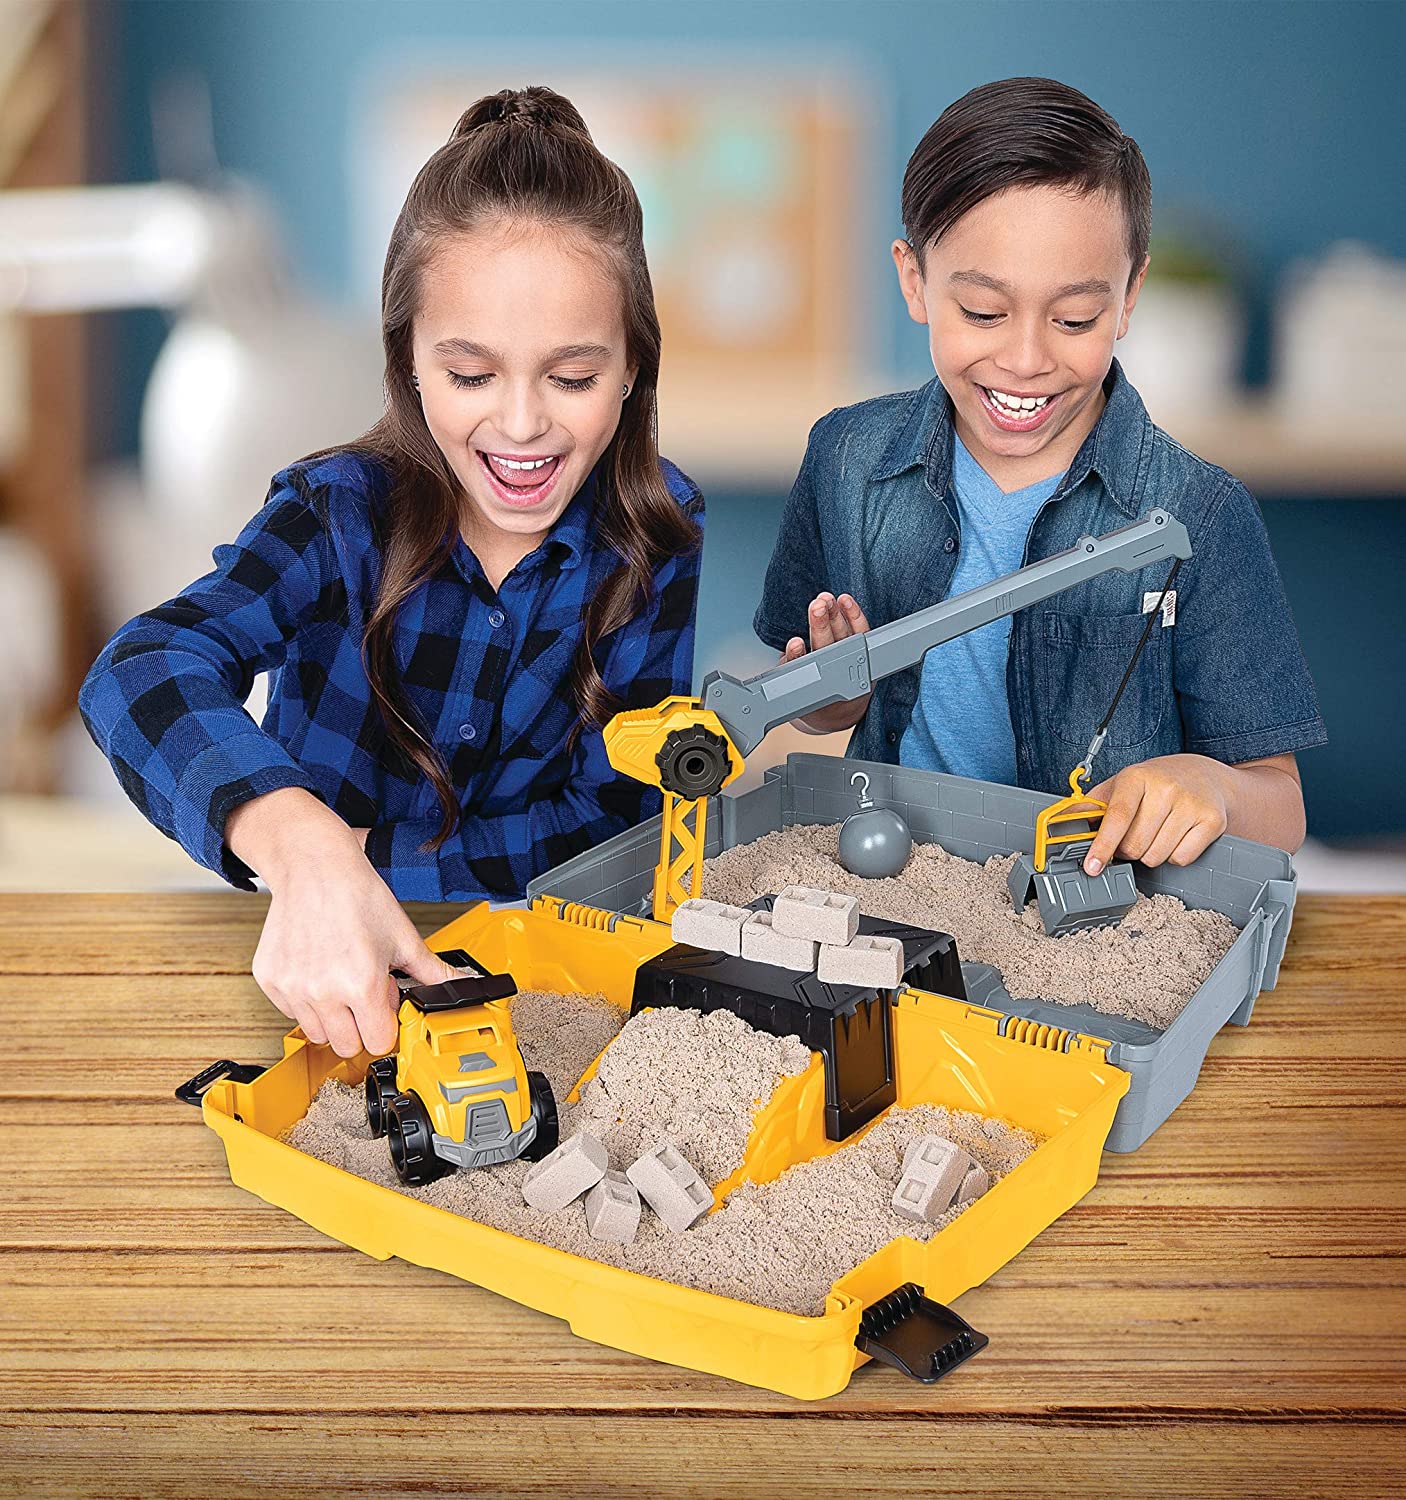 Kinetic Sand， Construction Site Folding Sandbox with Toy Truck and 2lbs of Play Sand， Sensory Toys for Kids Ages 3 and up